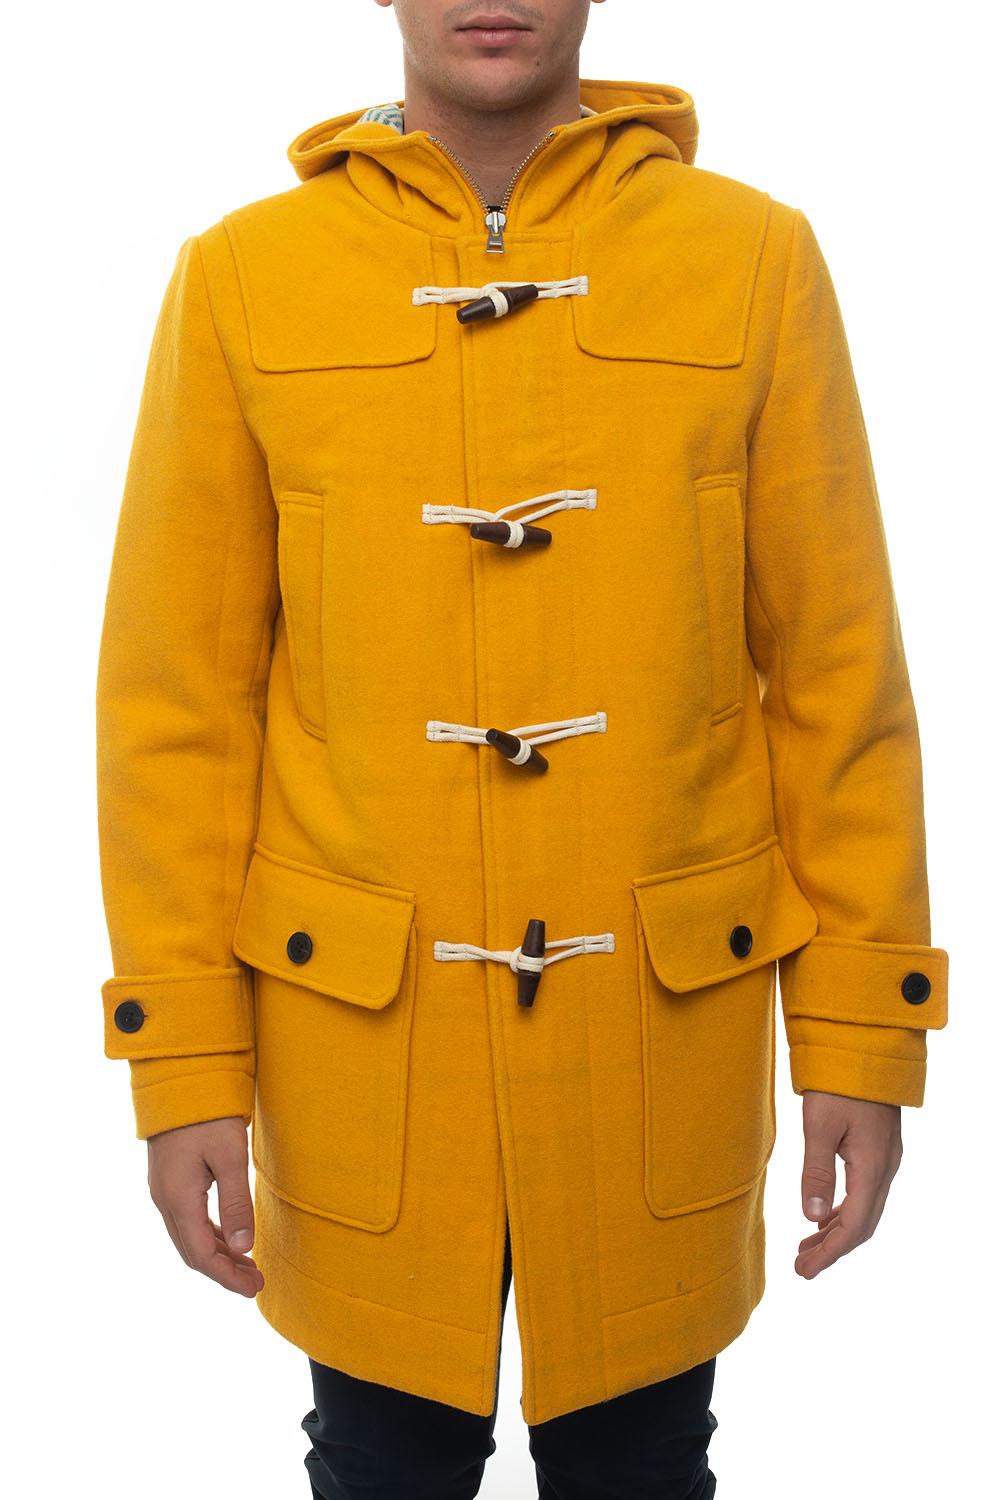 GANT Duffle Coat With Frog Fastening Yellow Wool for Men - Lyst